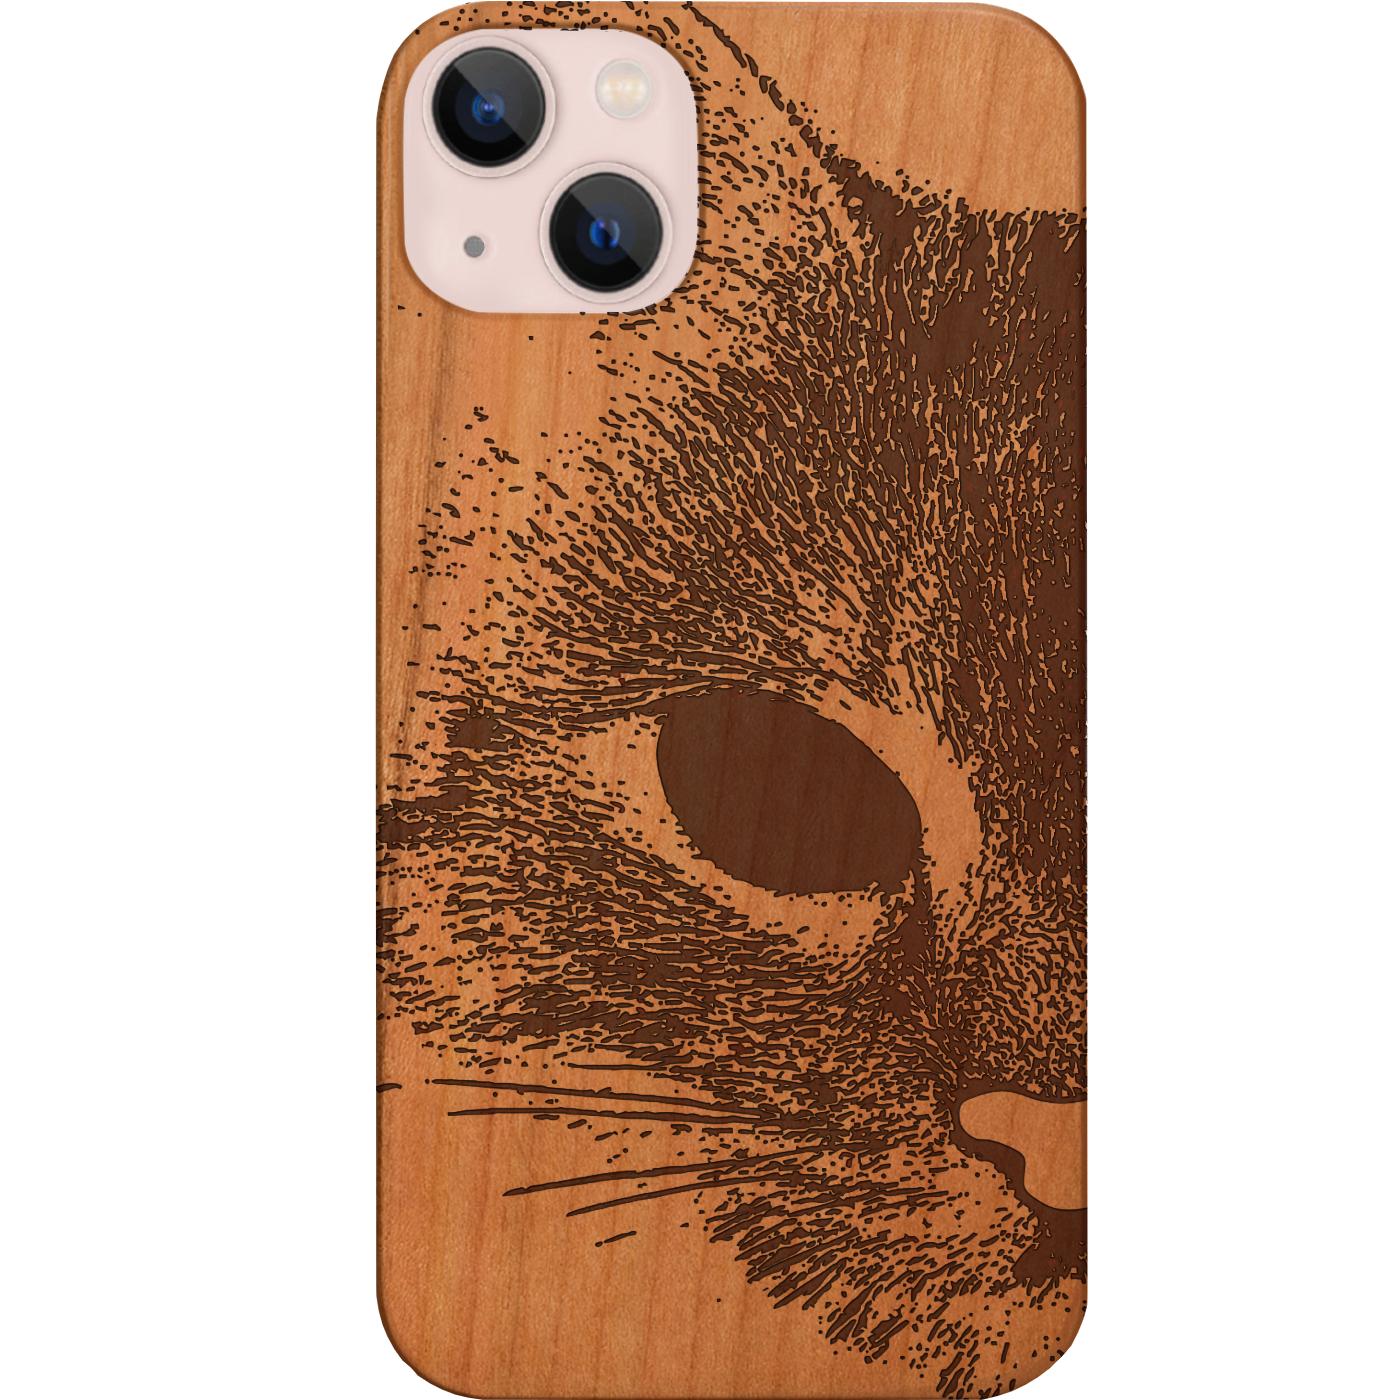 Mad Cat - Engraved Phone Case